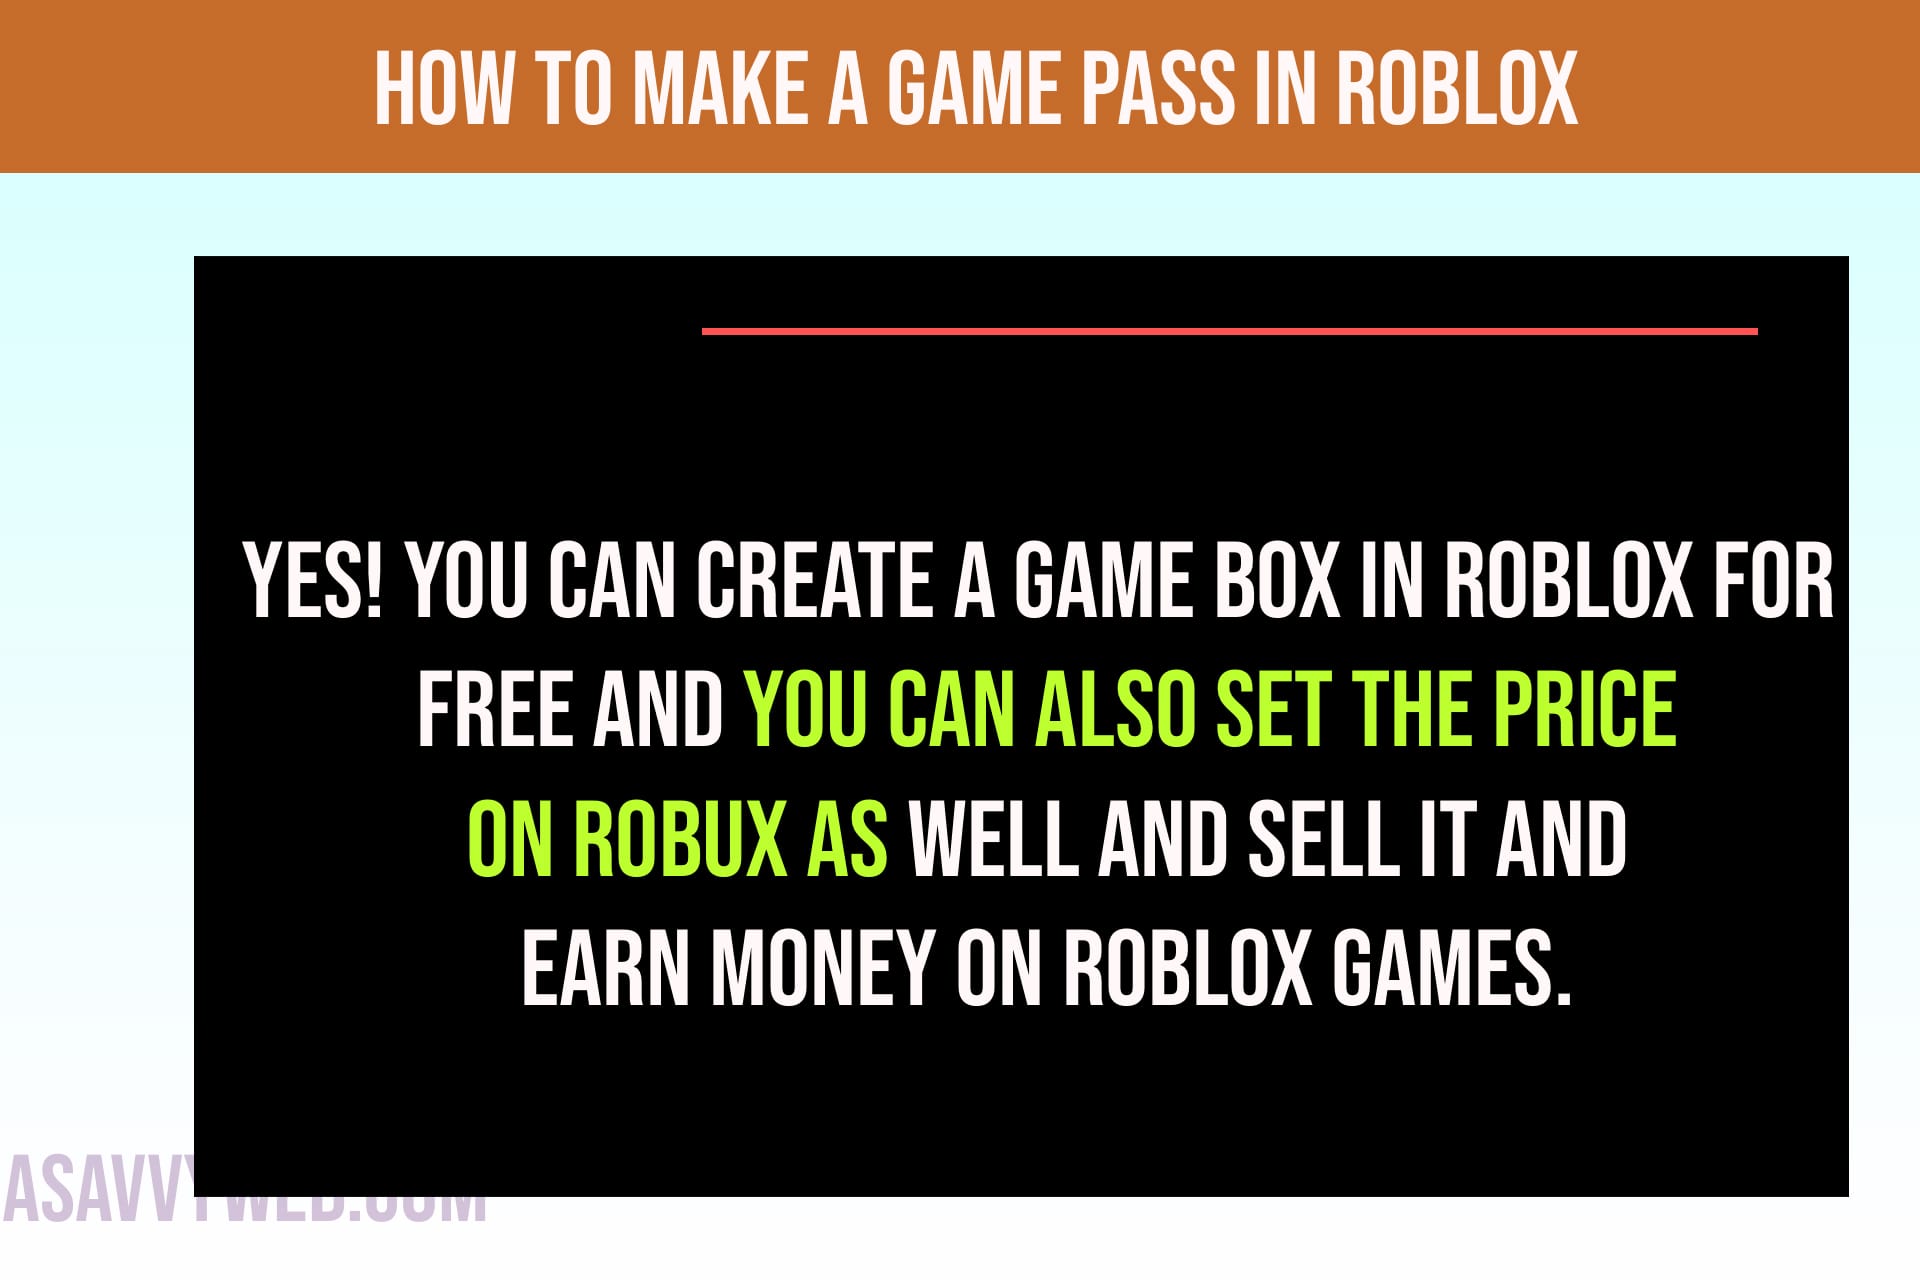 How to Create A Game Pass in Roblox - A Savvy Web